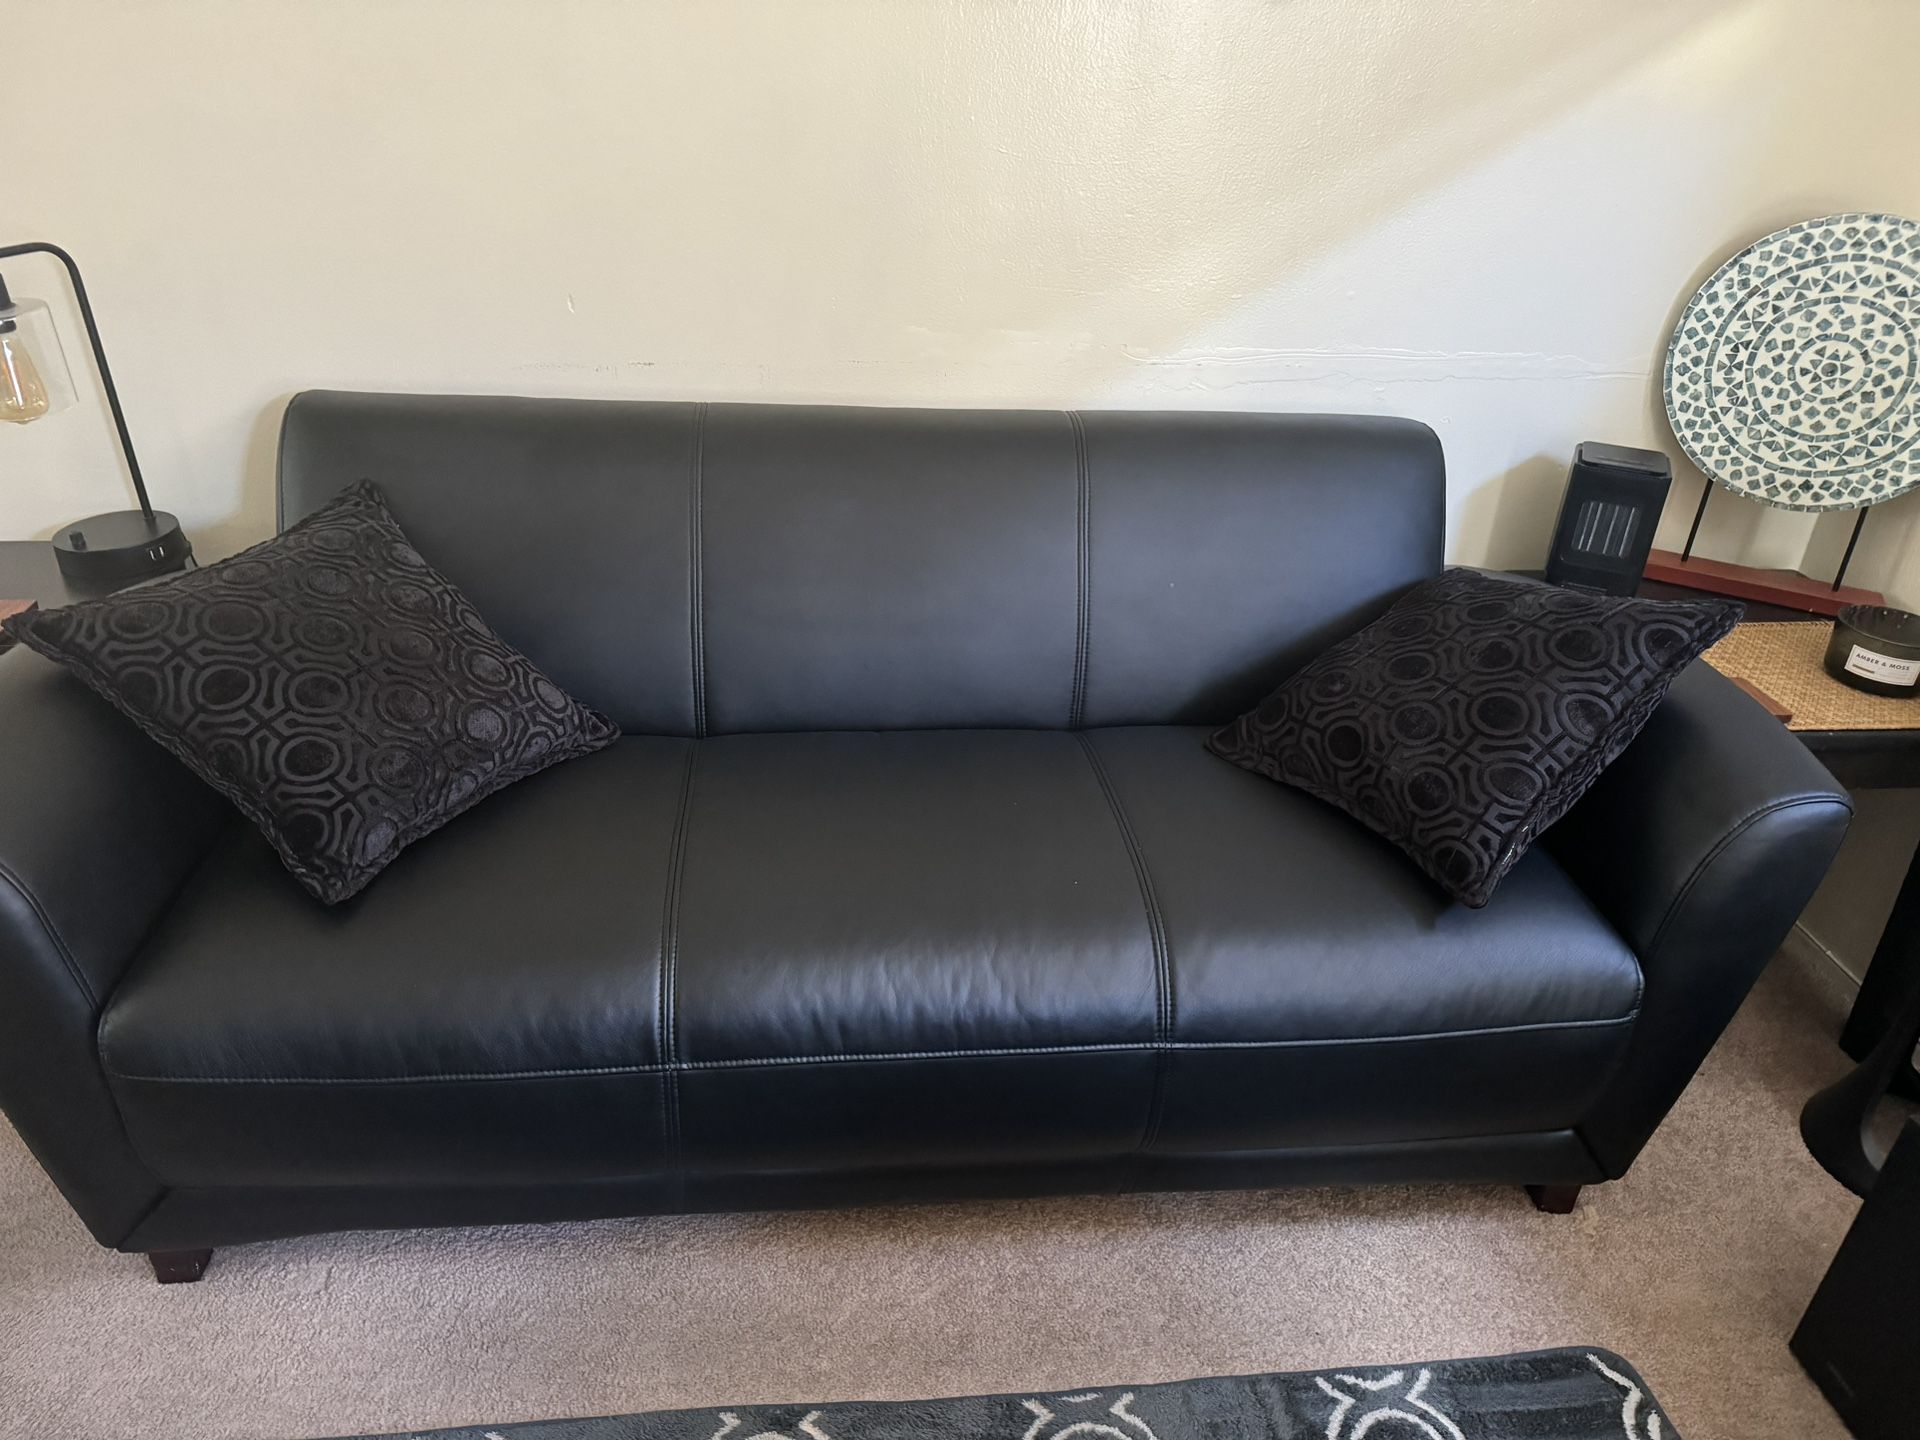 Black leather couch, perfect condition